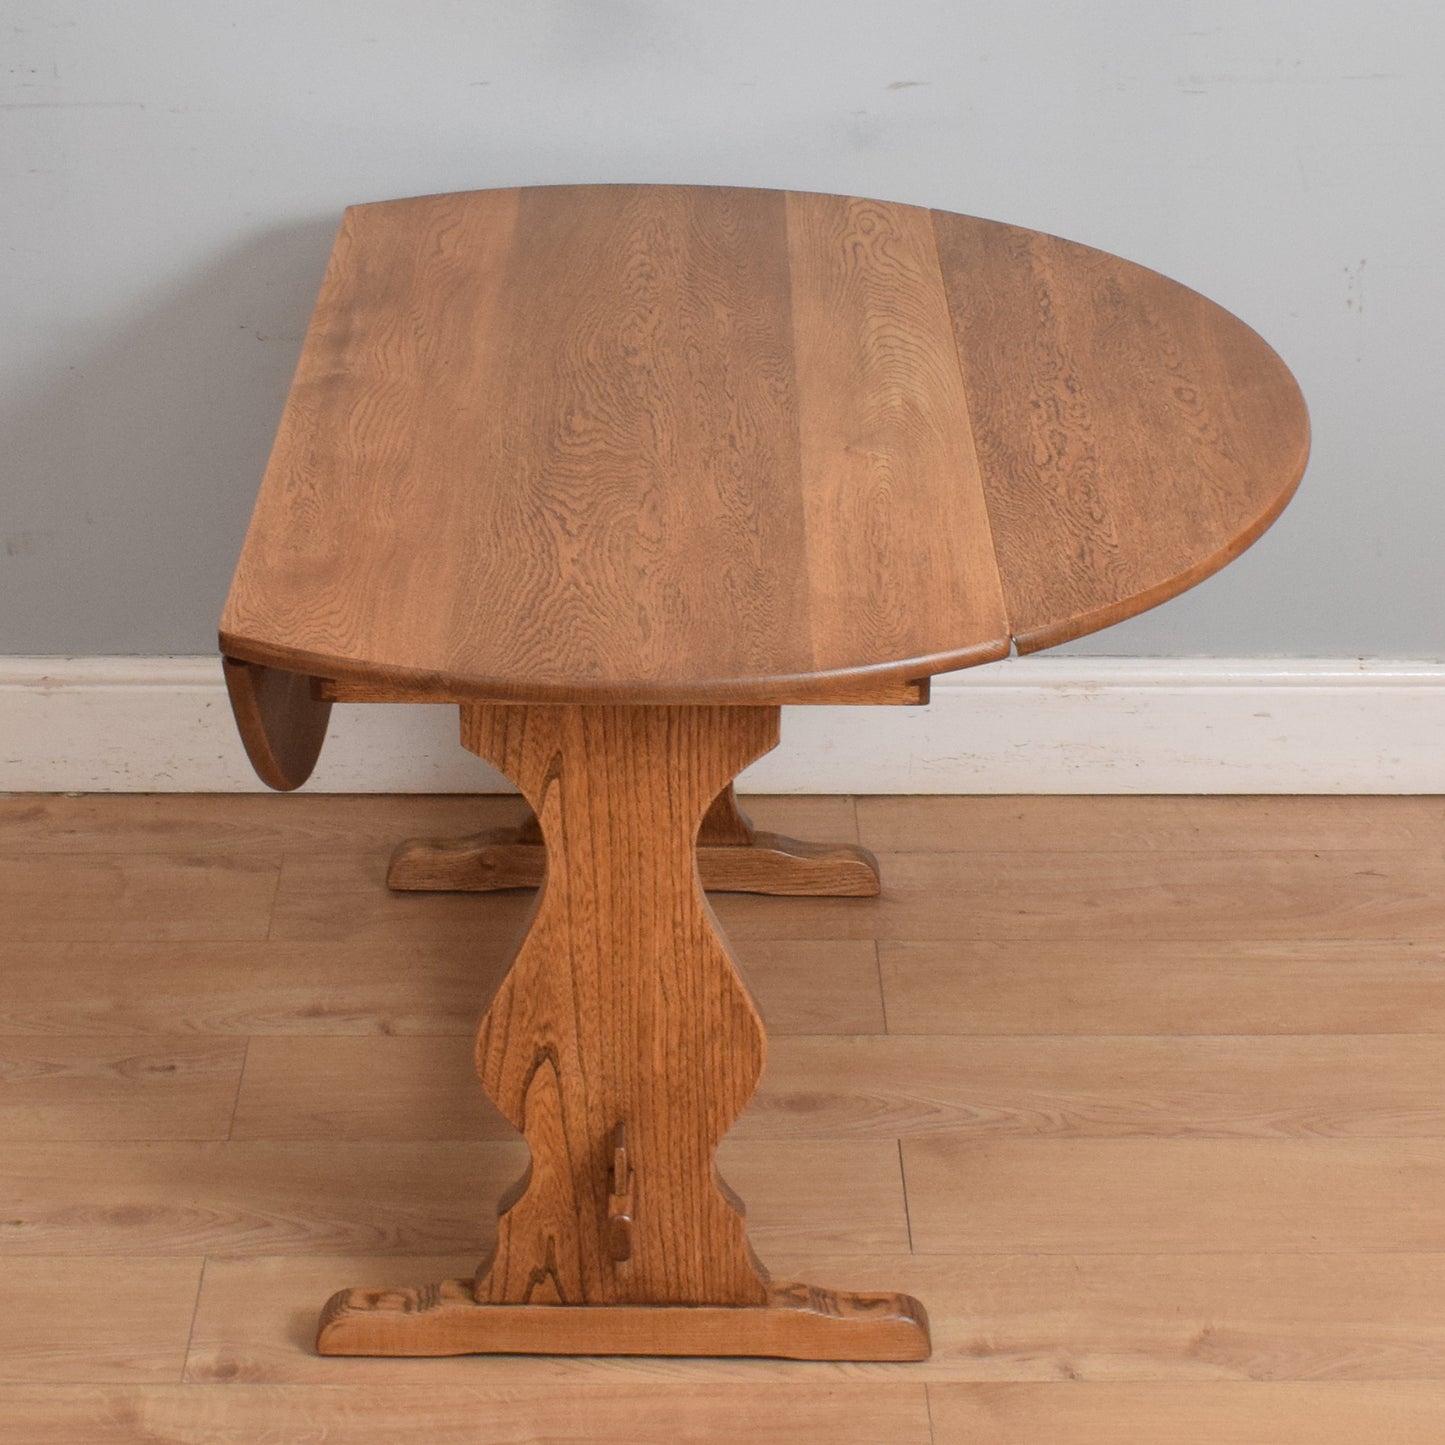 Restored Drop-Leaf Table and Four Chairs